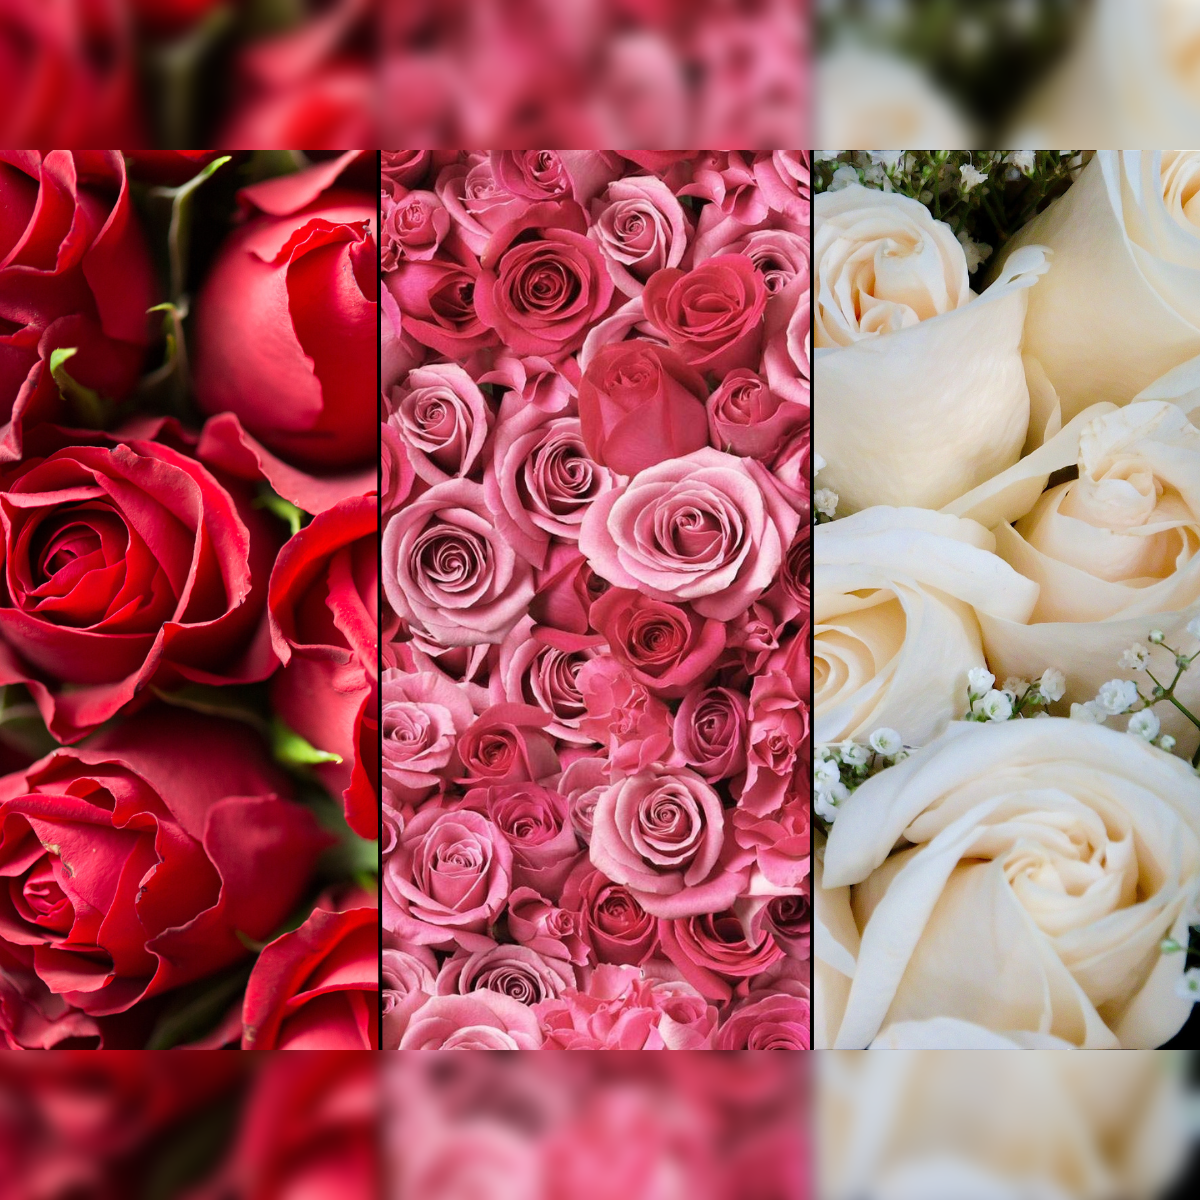 all types of roses